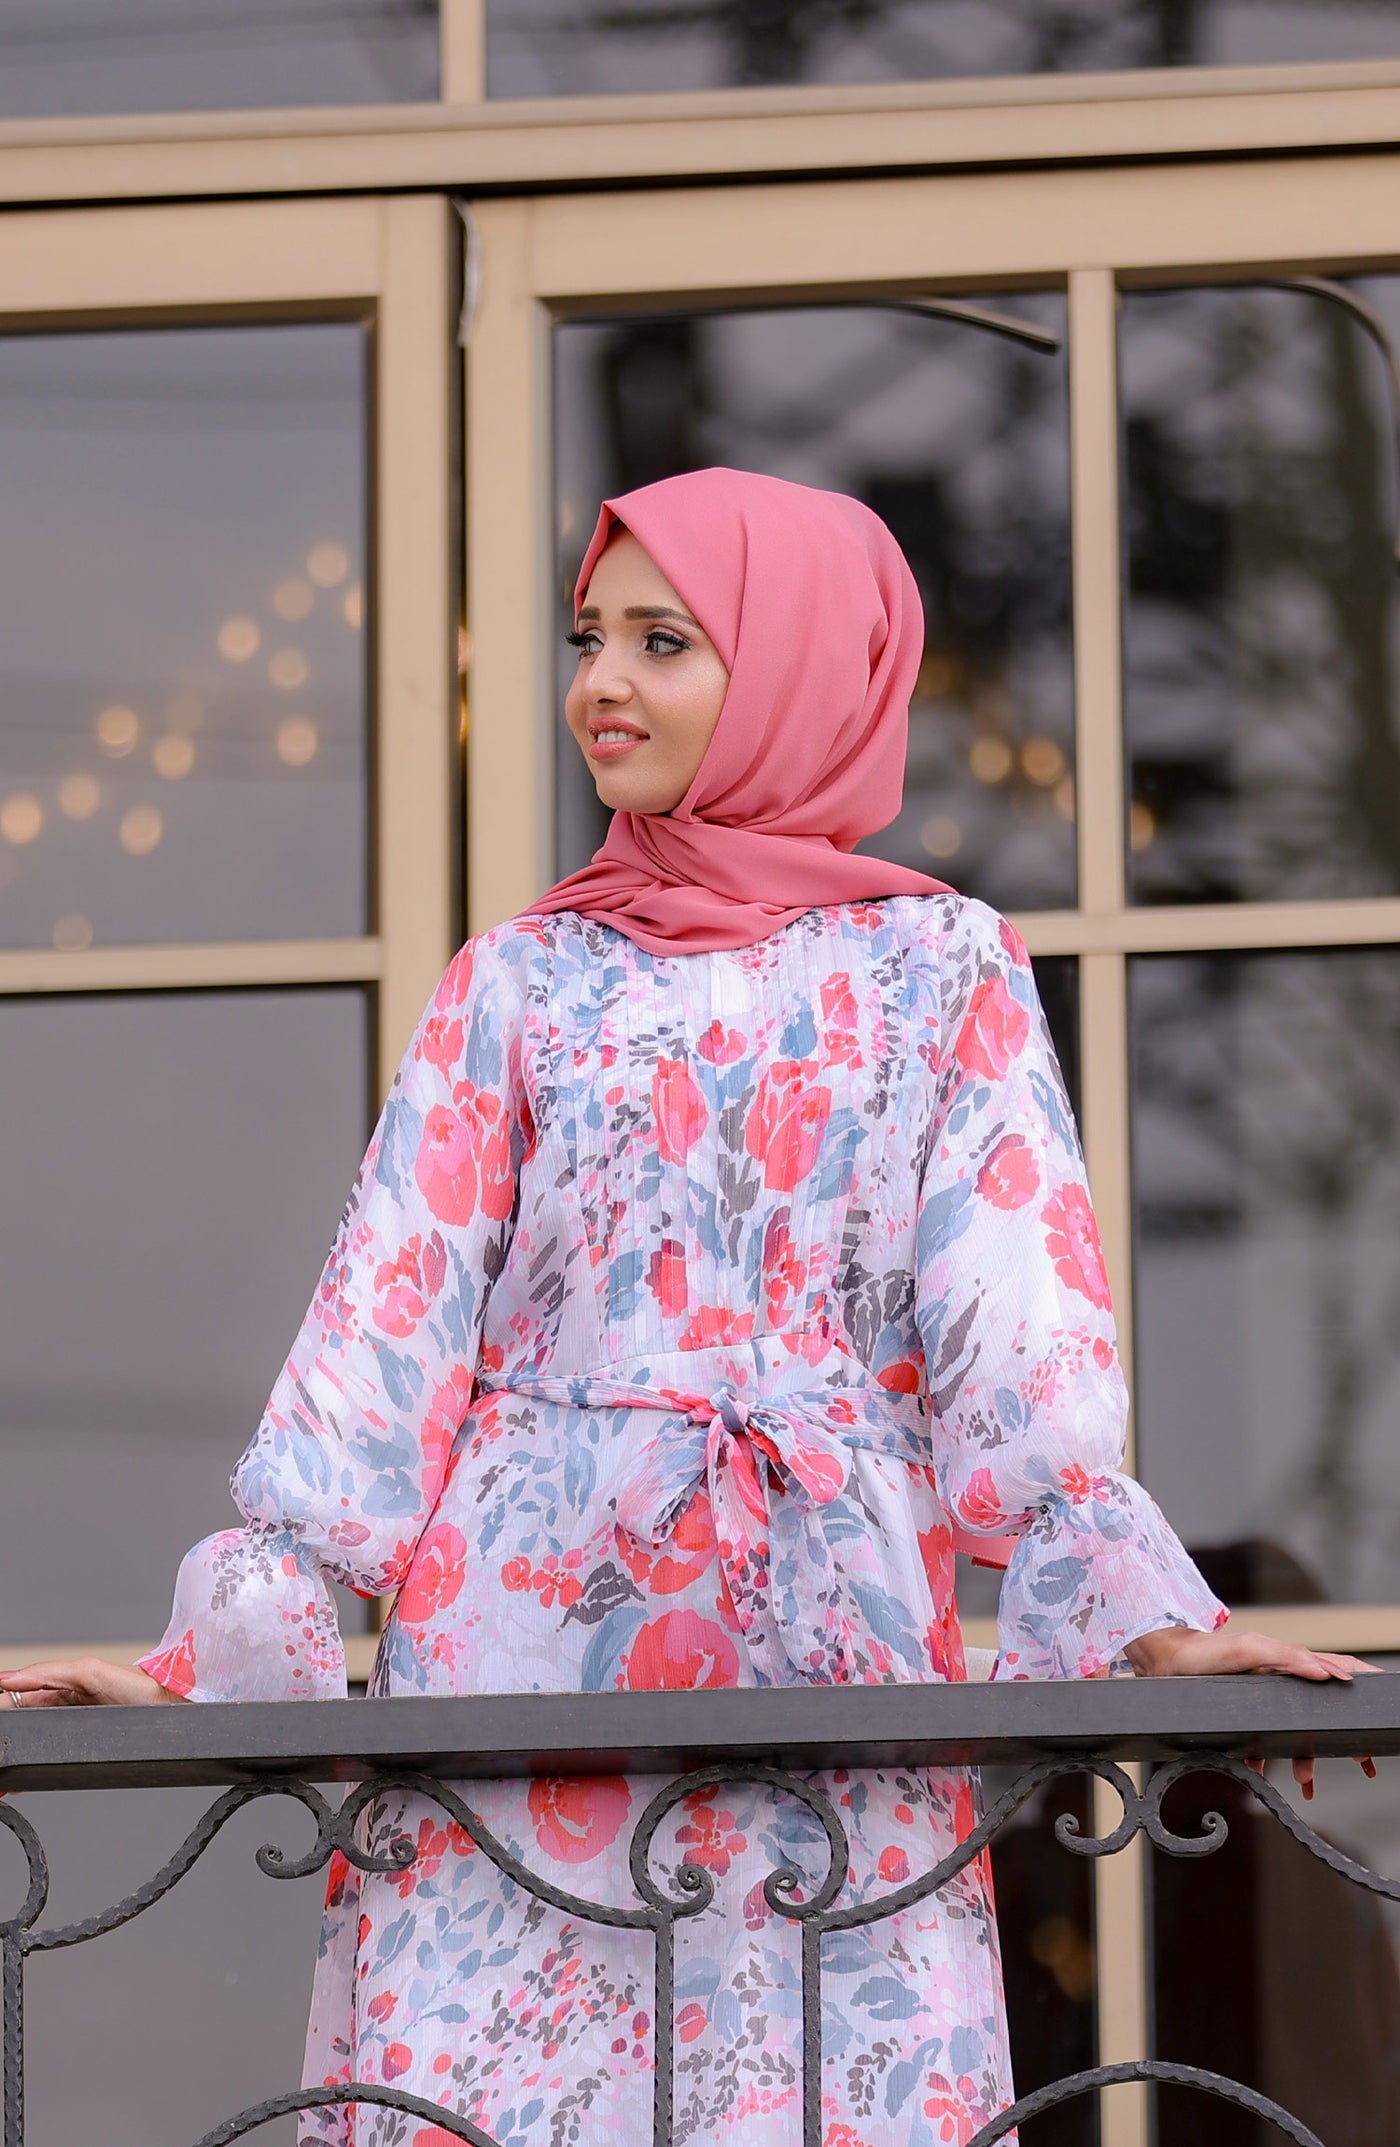 women with abstract white floral maxi dress & pink hijab